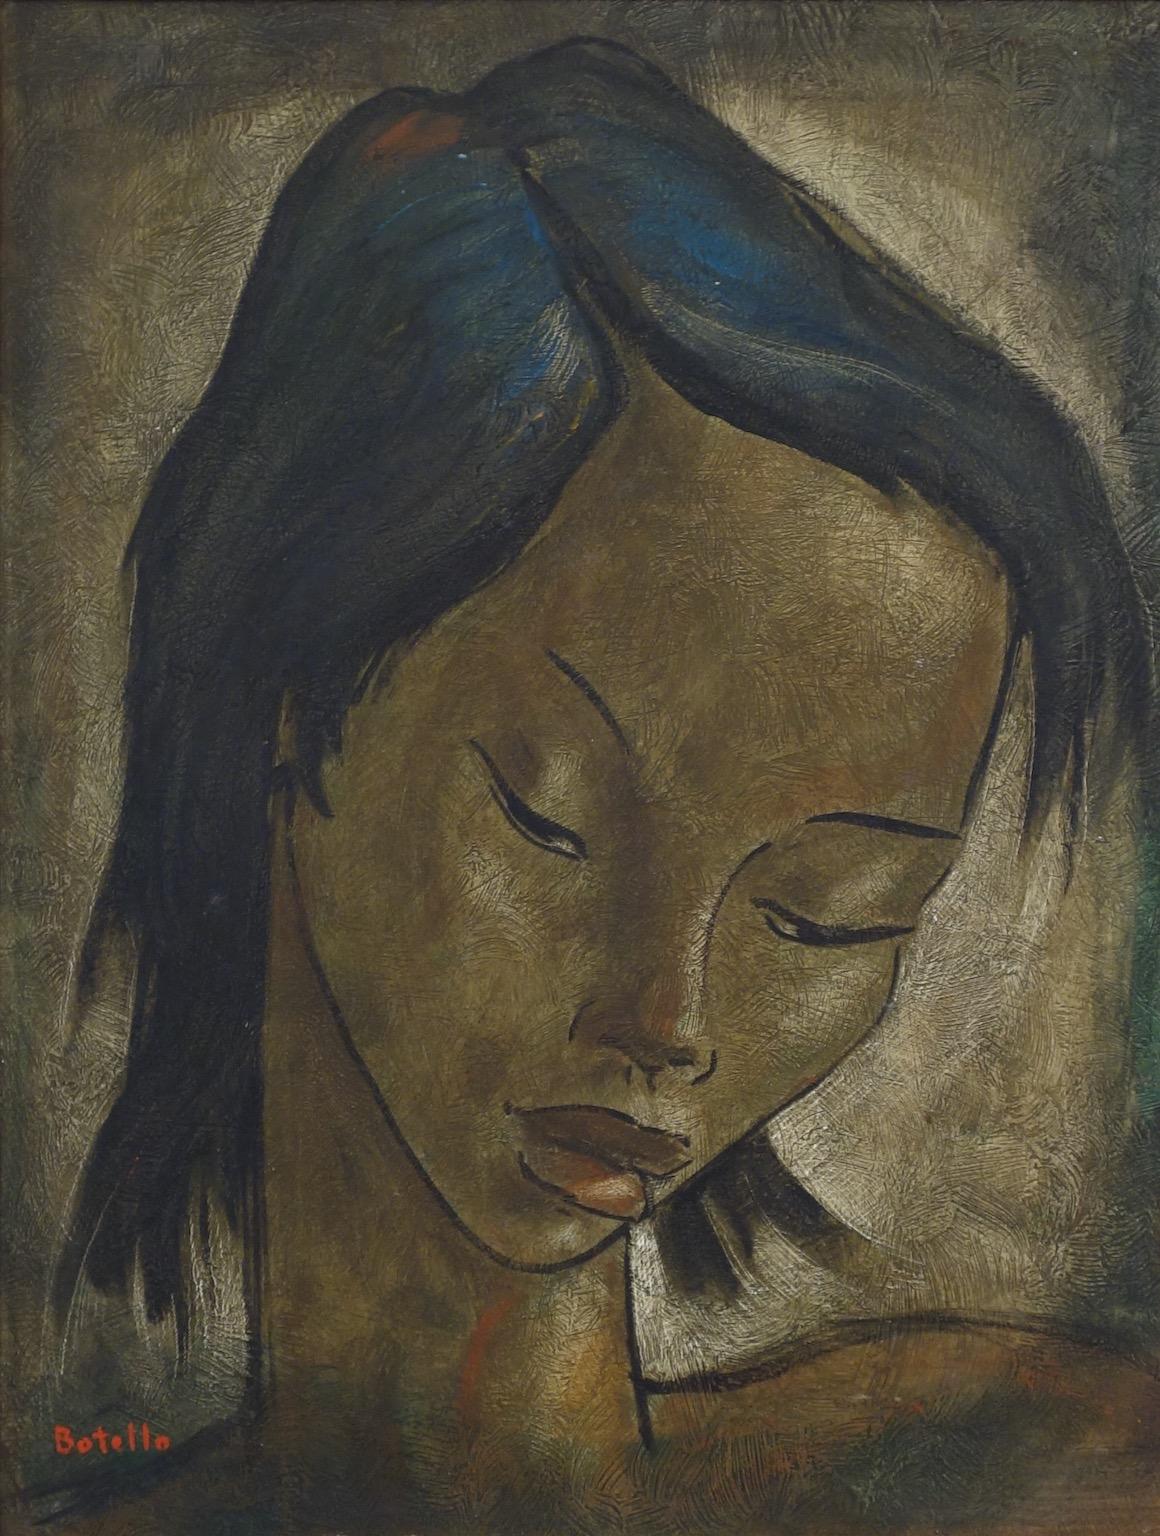 Haitian Woman - Painting by Angel Botello